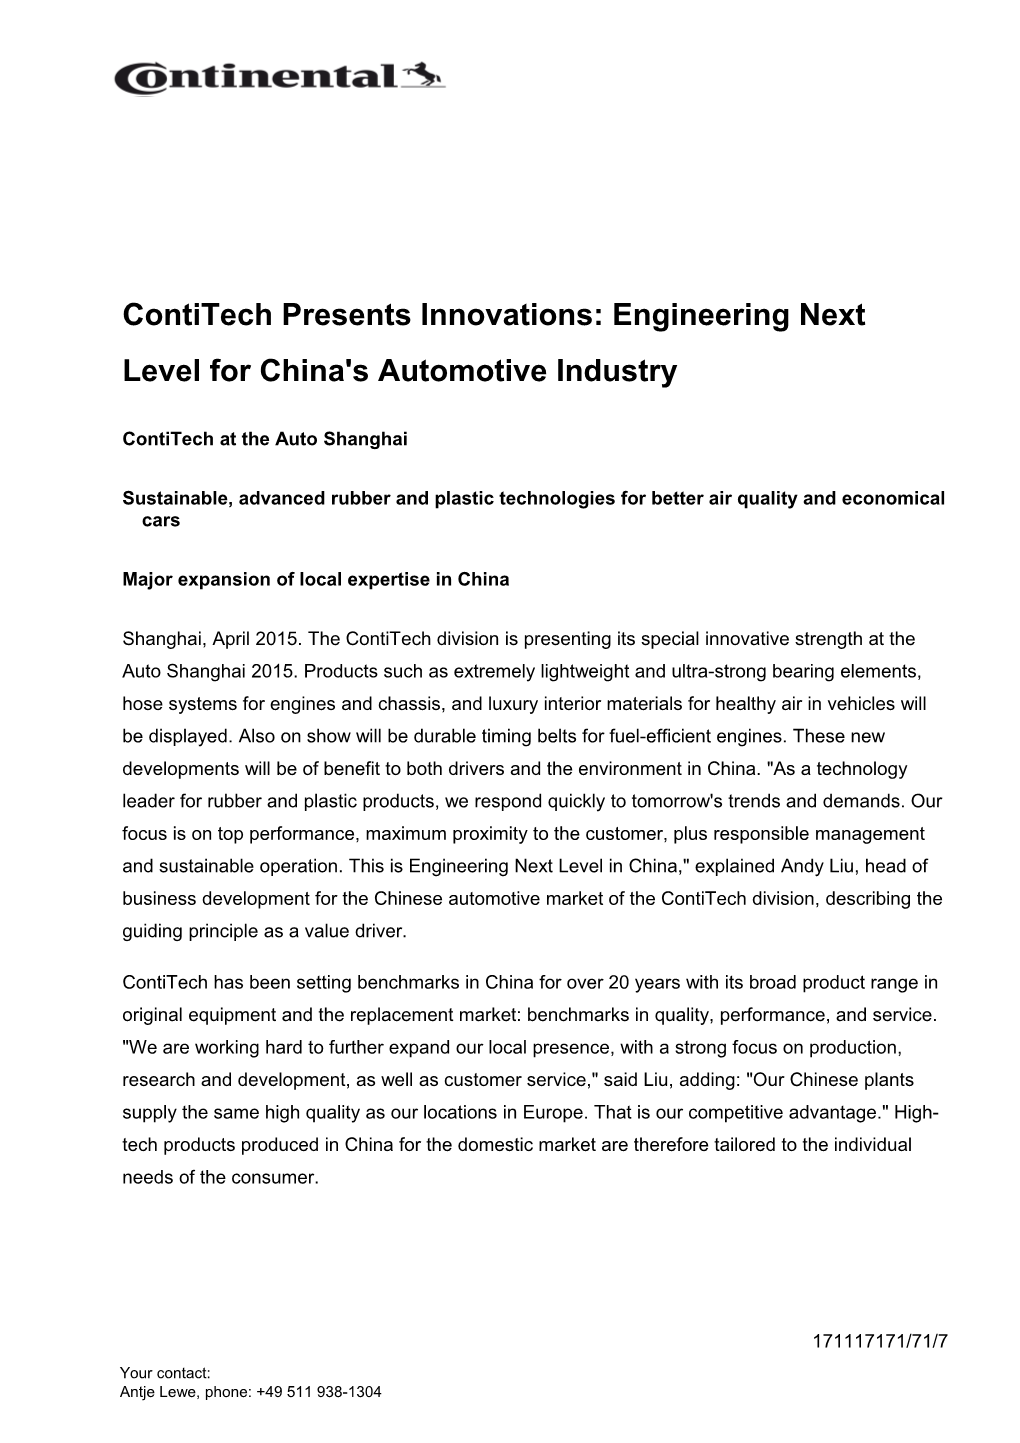 Contitech Presents Innovations: Engineering Next Level for China's Automotive Industry